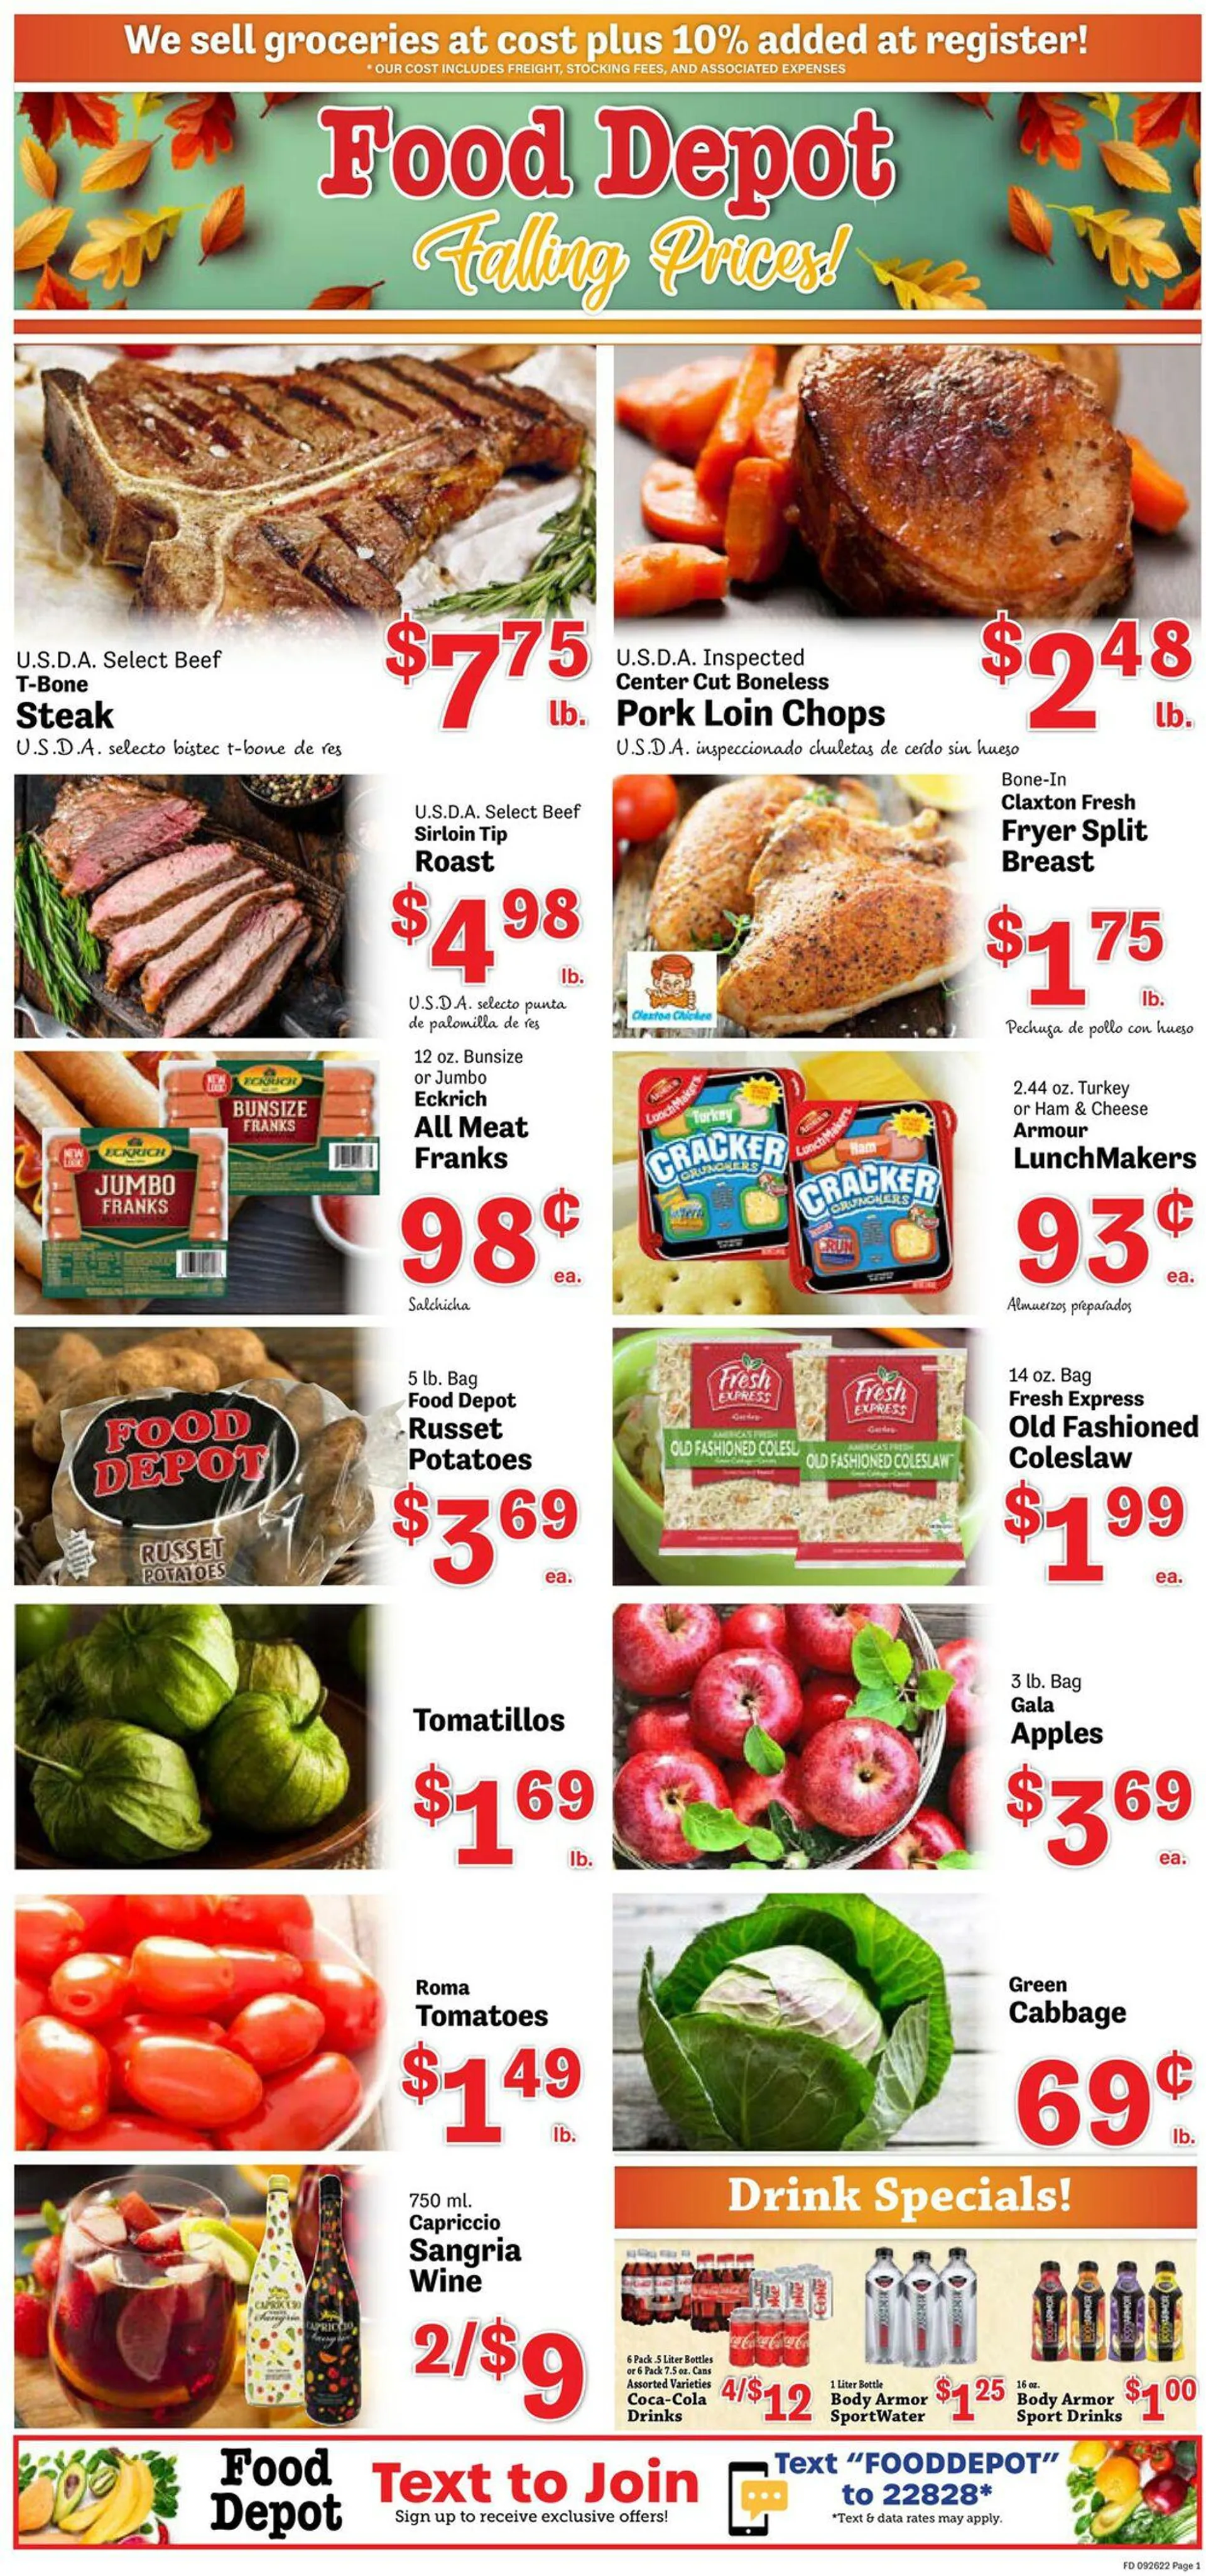 Food Depot Current weekly ad - 1